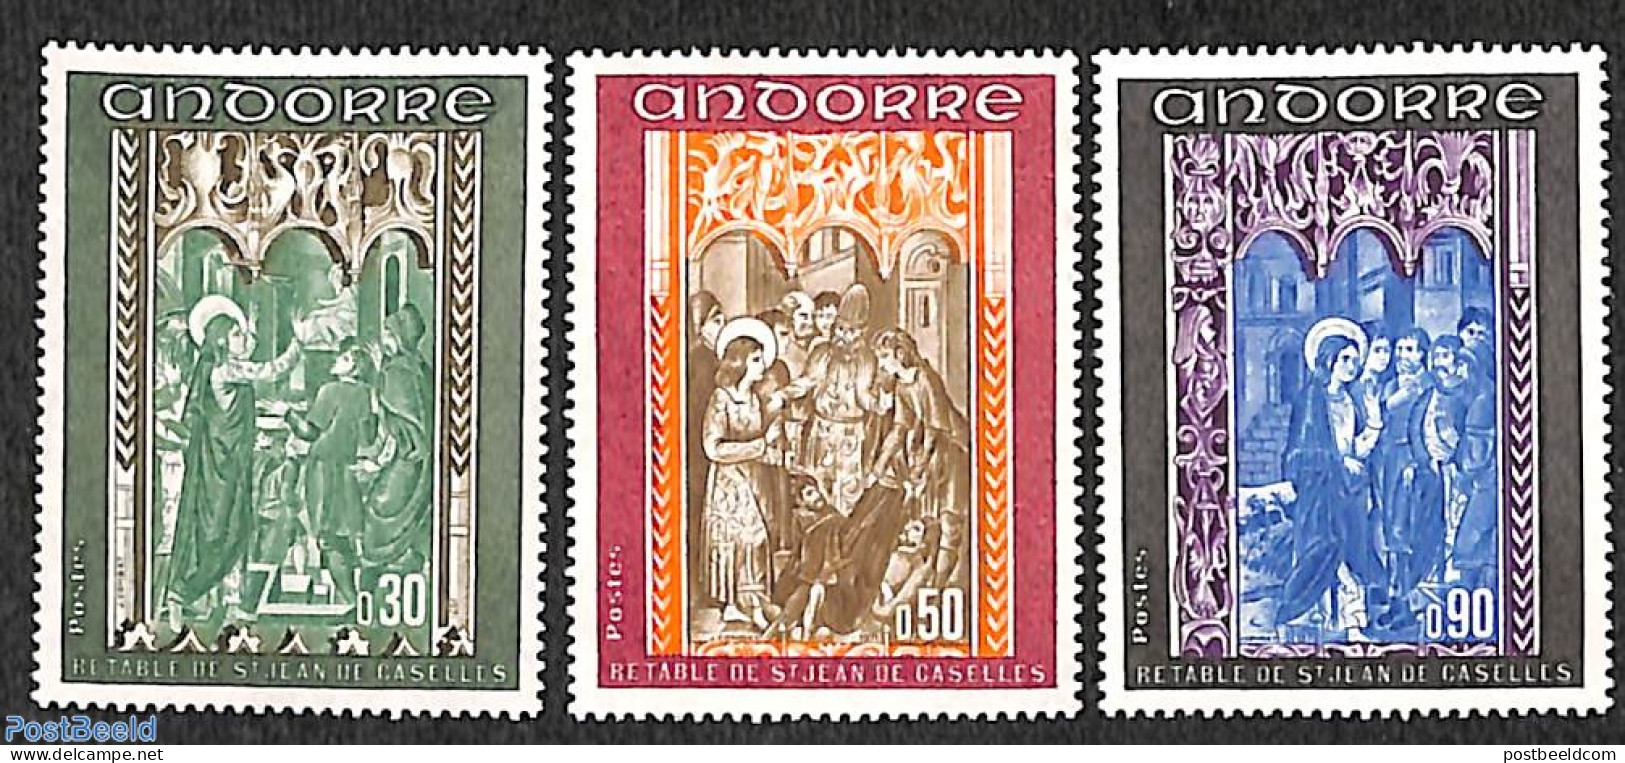 Andorra, French Post 1971 Frescoes 3v, Mint NH, Religion - Religion - Art - Paintings - Unused Stamps